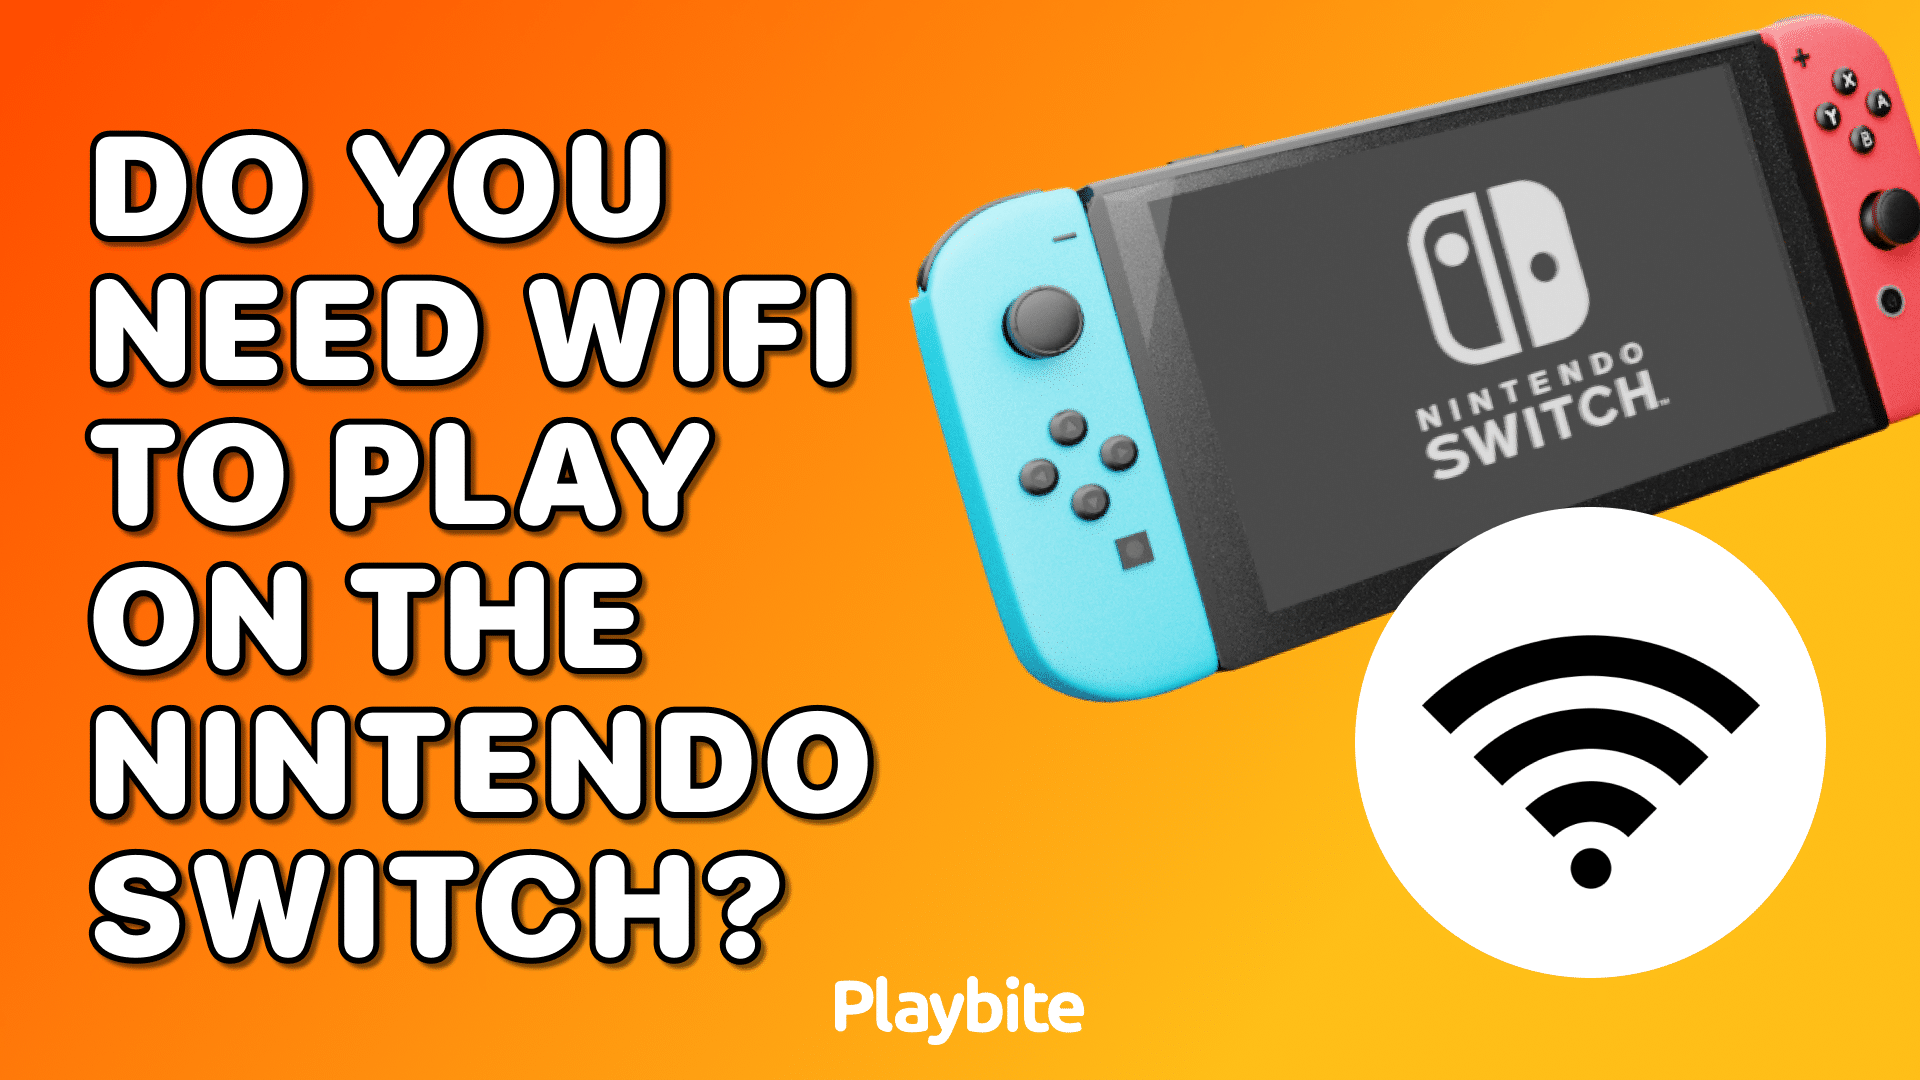 Do You Need WiFi To Play On The Nintendo Switch? - Playbite